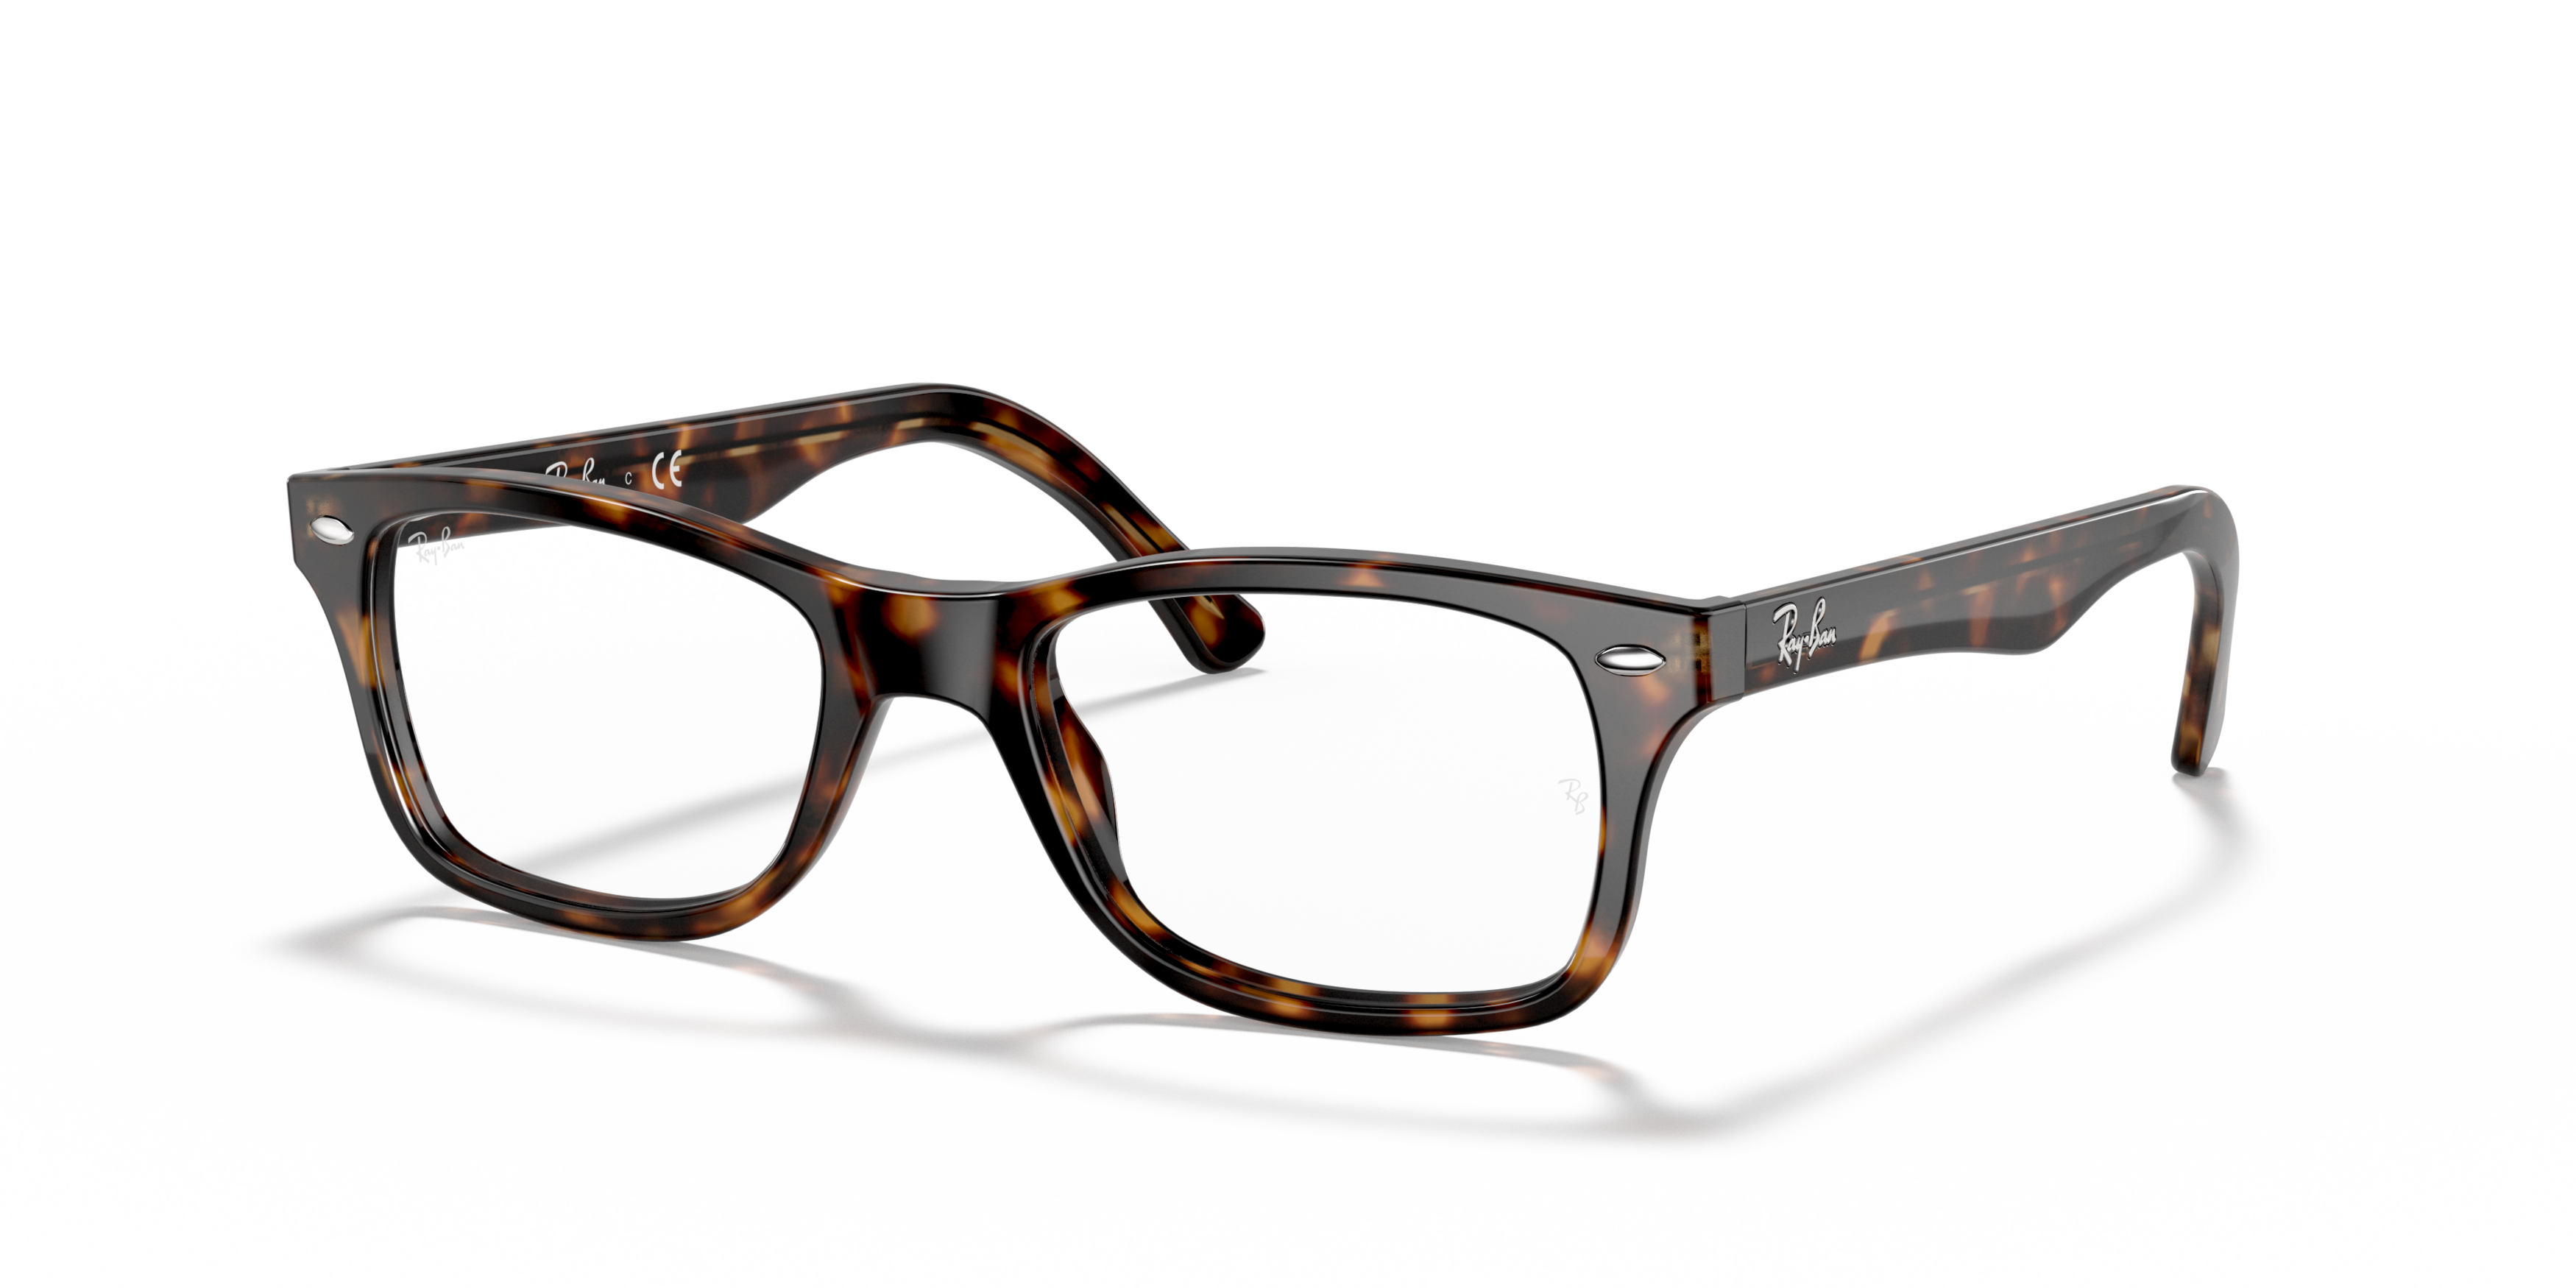 Angle_Left01 Ray-Ban RX 5228 Glasses Transparent / Tortoise Shell